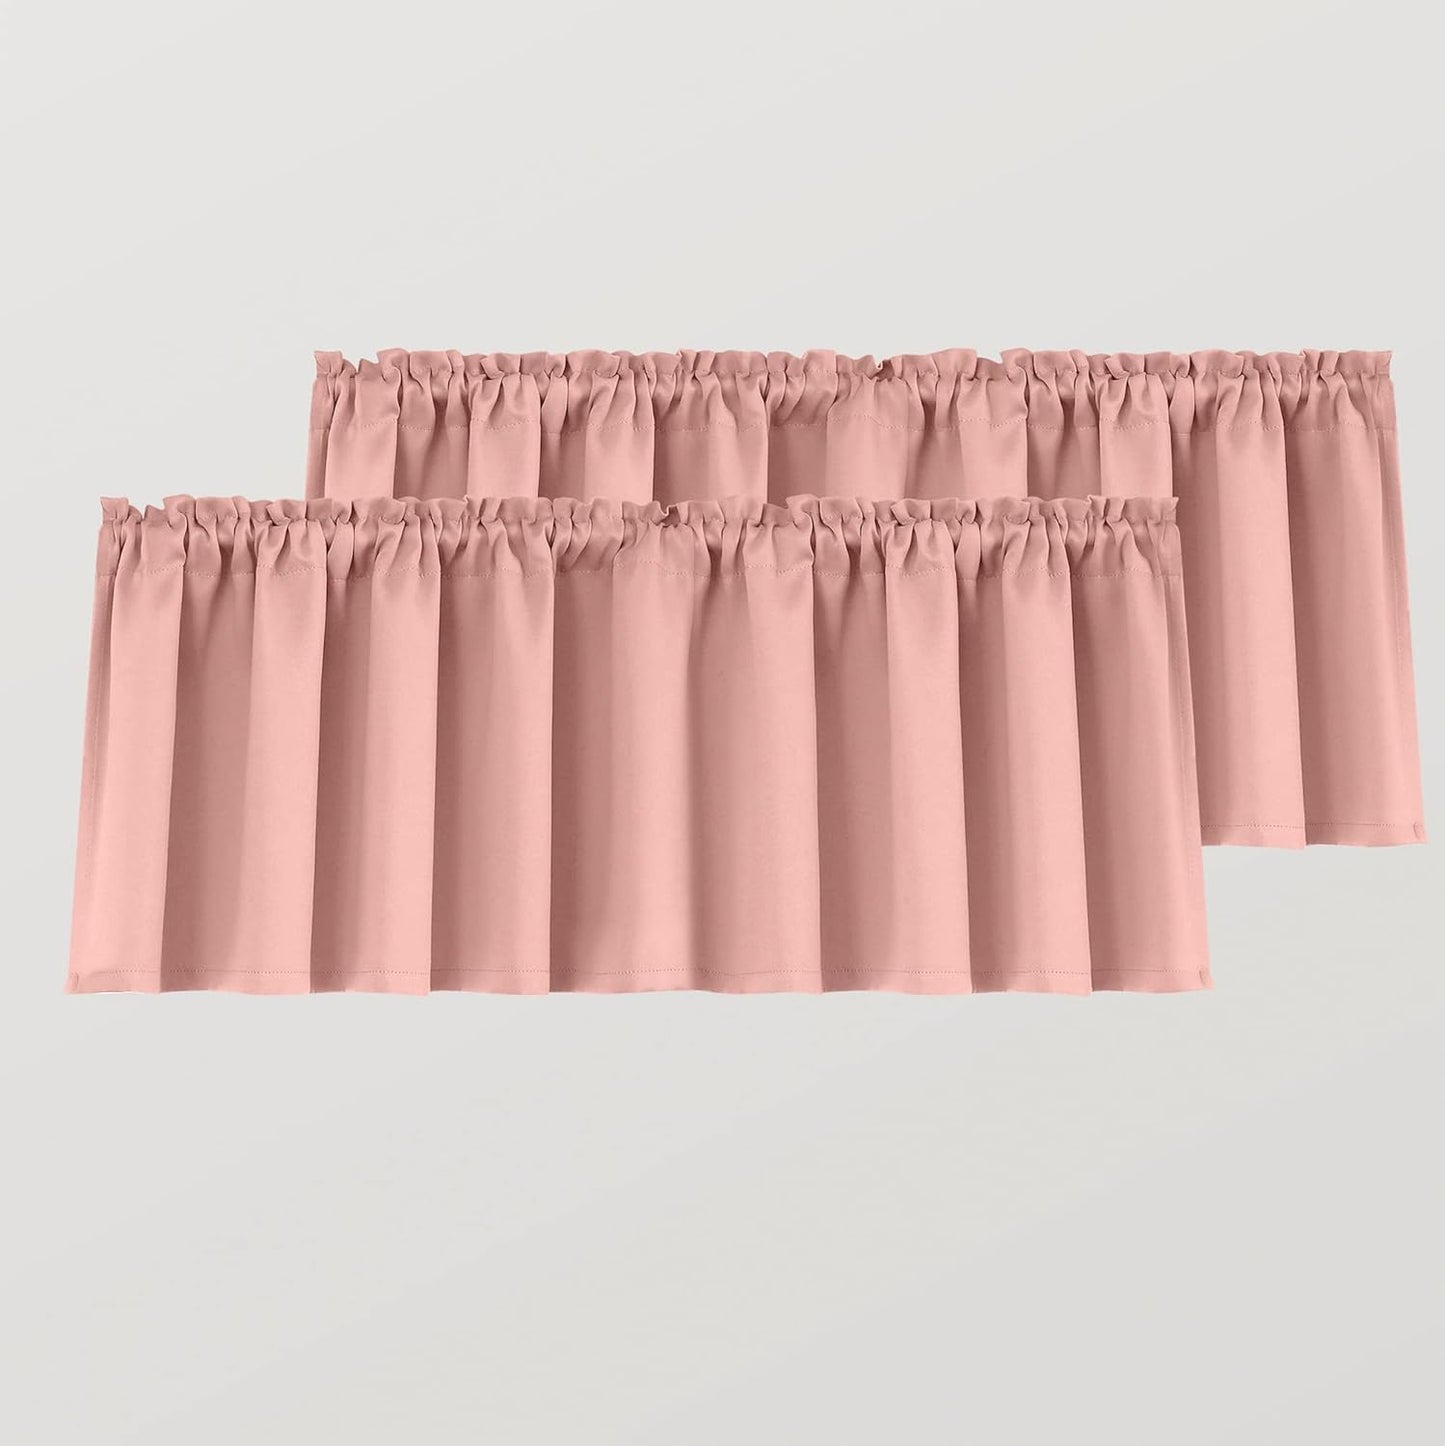 Mrs.Naturall Beige Valance Curtains for Windows 36X16 Inch Length  MRS.NATURALL TEXTILE Blush Pink 36X16 